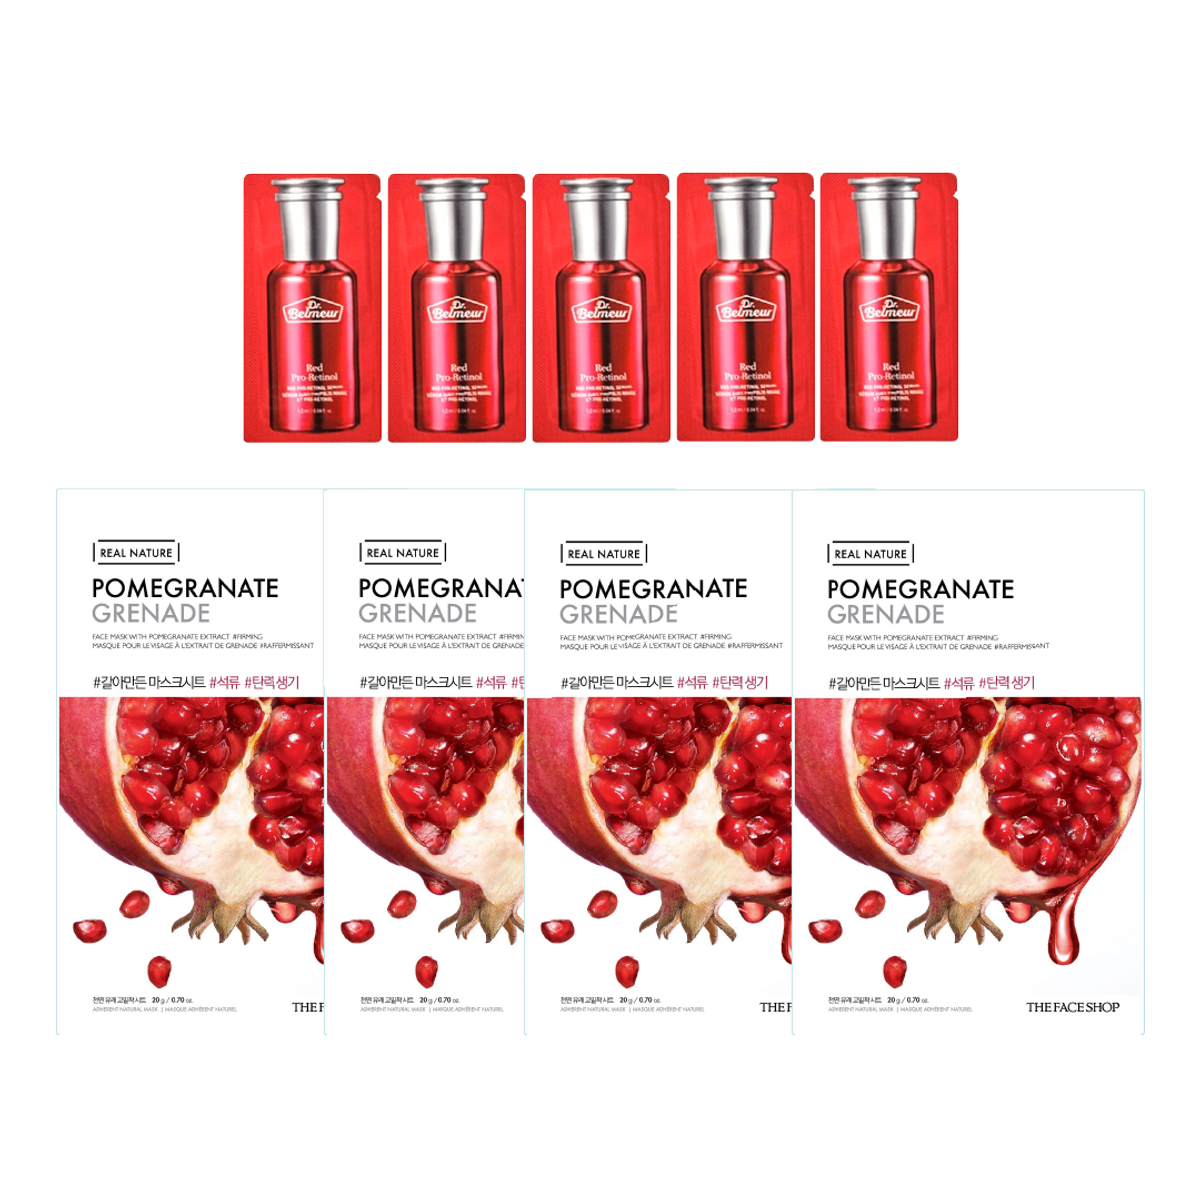 gift-combo-4-mat-na-real-nature-pomegranate-5-sample-tinh-chat-dr-belmeur-red-pro-retinol-1